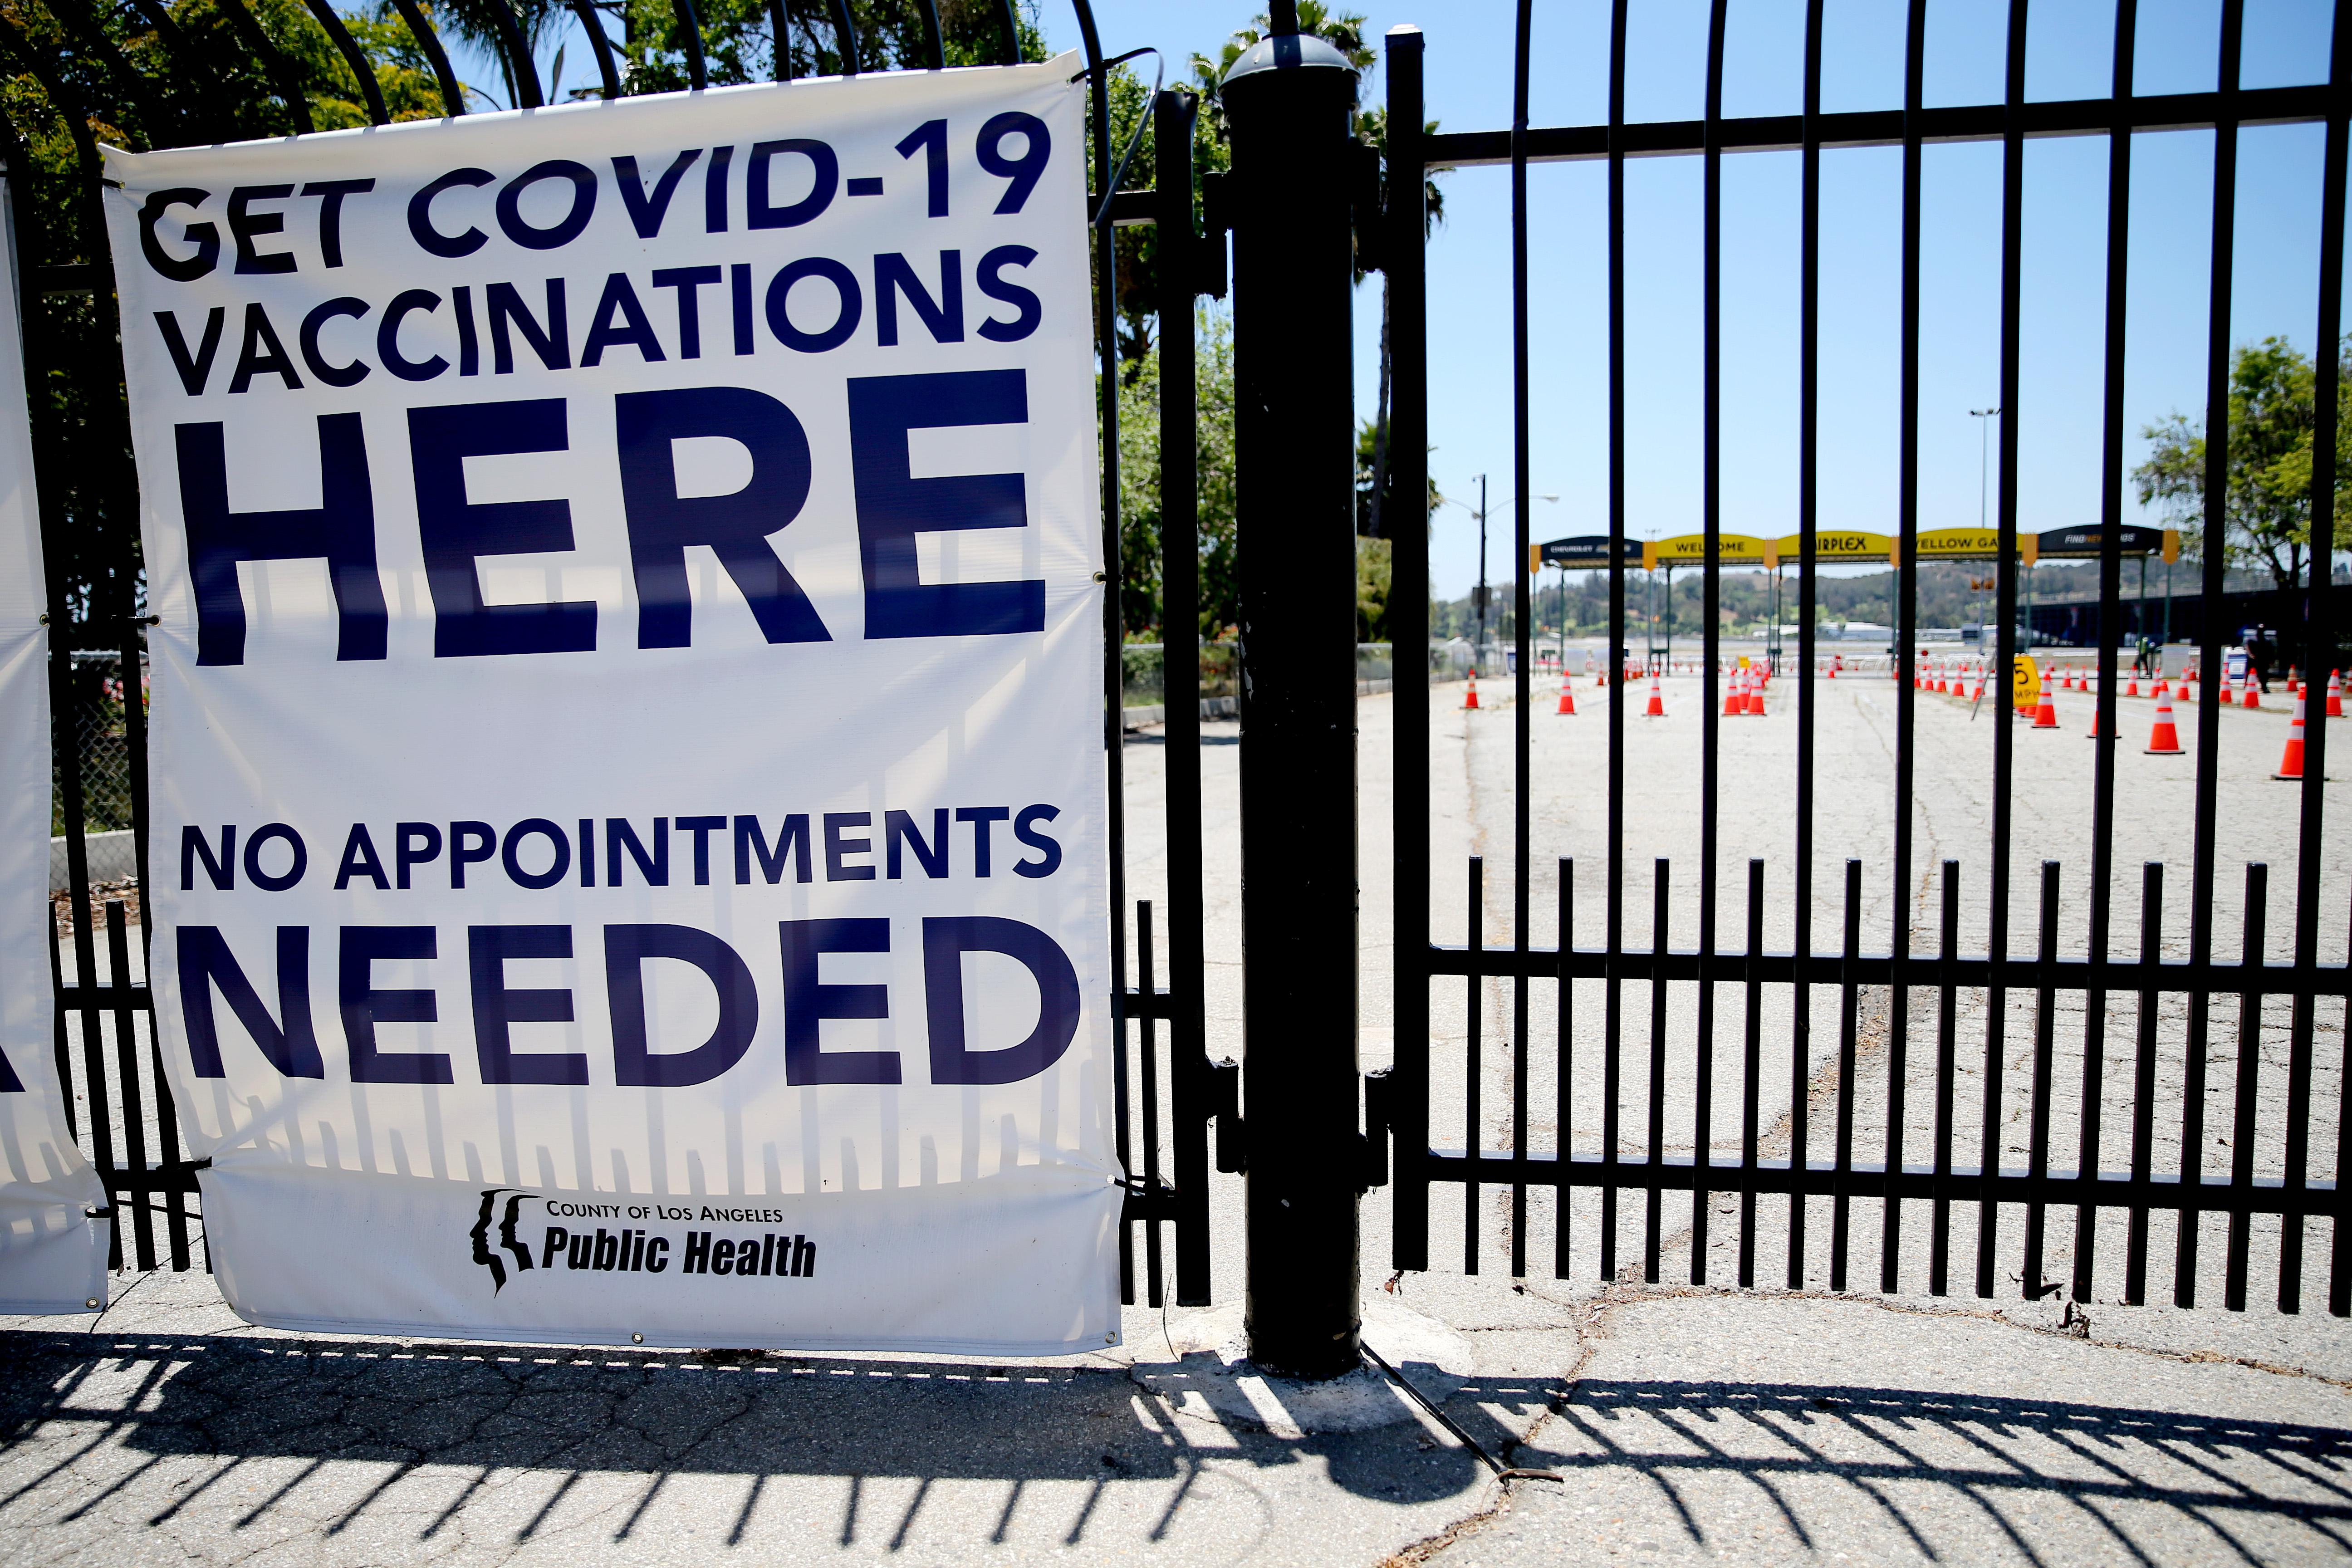 A sign on a black metal gate says "Get COVID-19 Vaccinations Here No Appointments Needed." Behind the gate are rows and rows of empty drive-thru lanes marked by traffic cones.